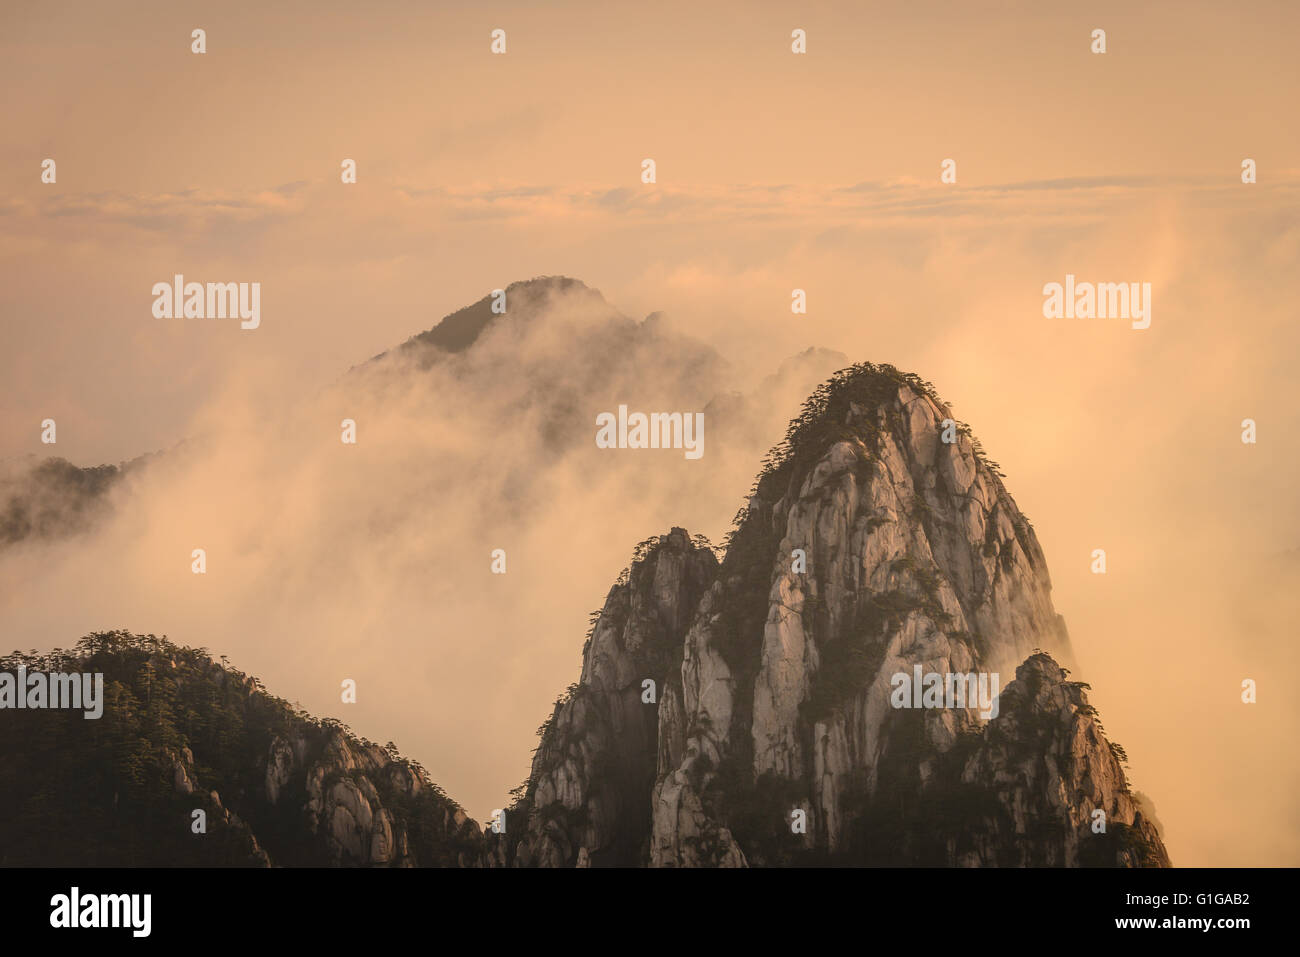 Sunrise at Yellow mountain in Anhui province, China Stock Photo